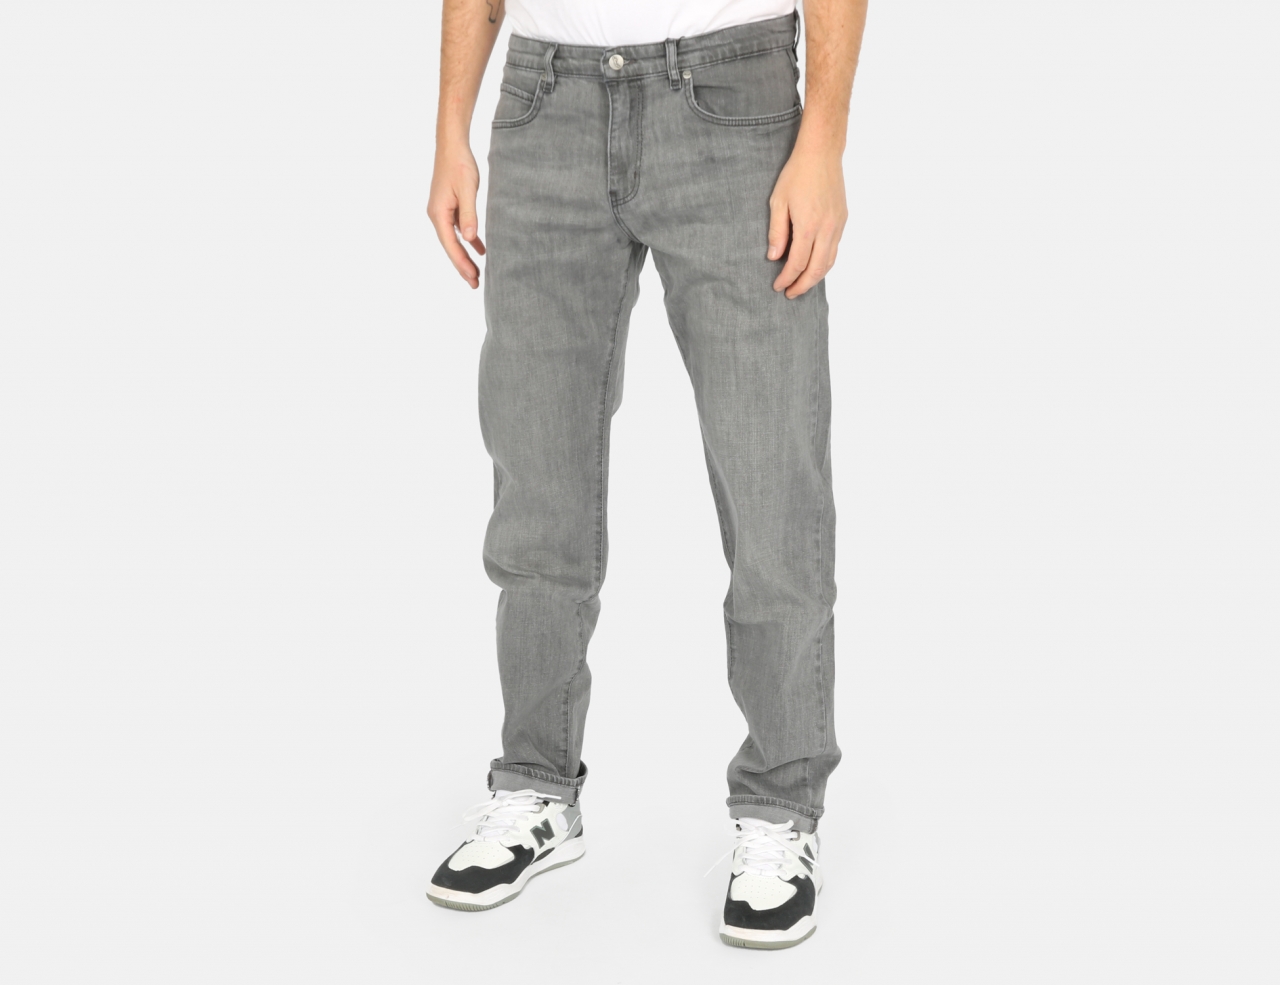 Reell Jeans Barfly Jeans Pant - Concrete Grey